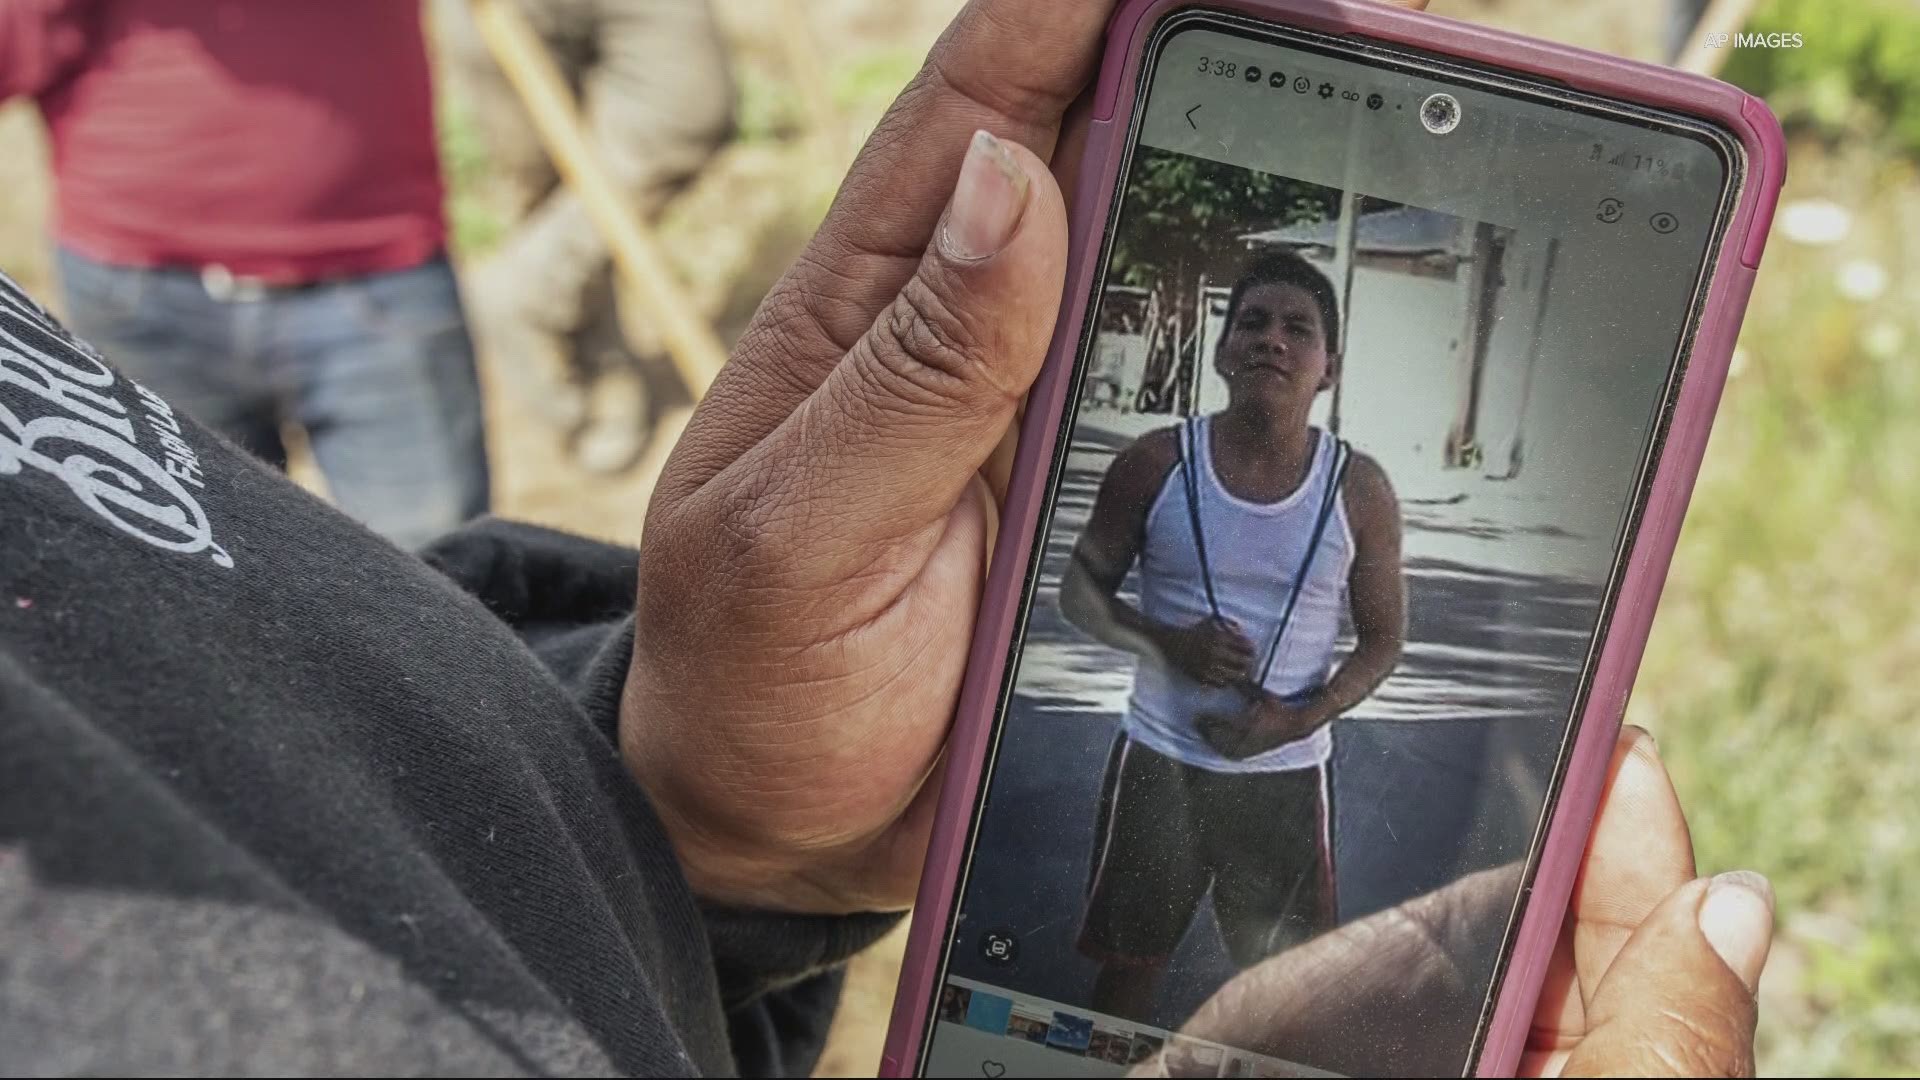 An immigrant farmworker in Marion County collapsed and died while working in the heat. Advocates are outraged and want more legal protections for farm workers.